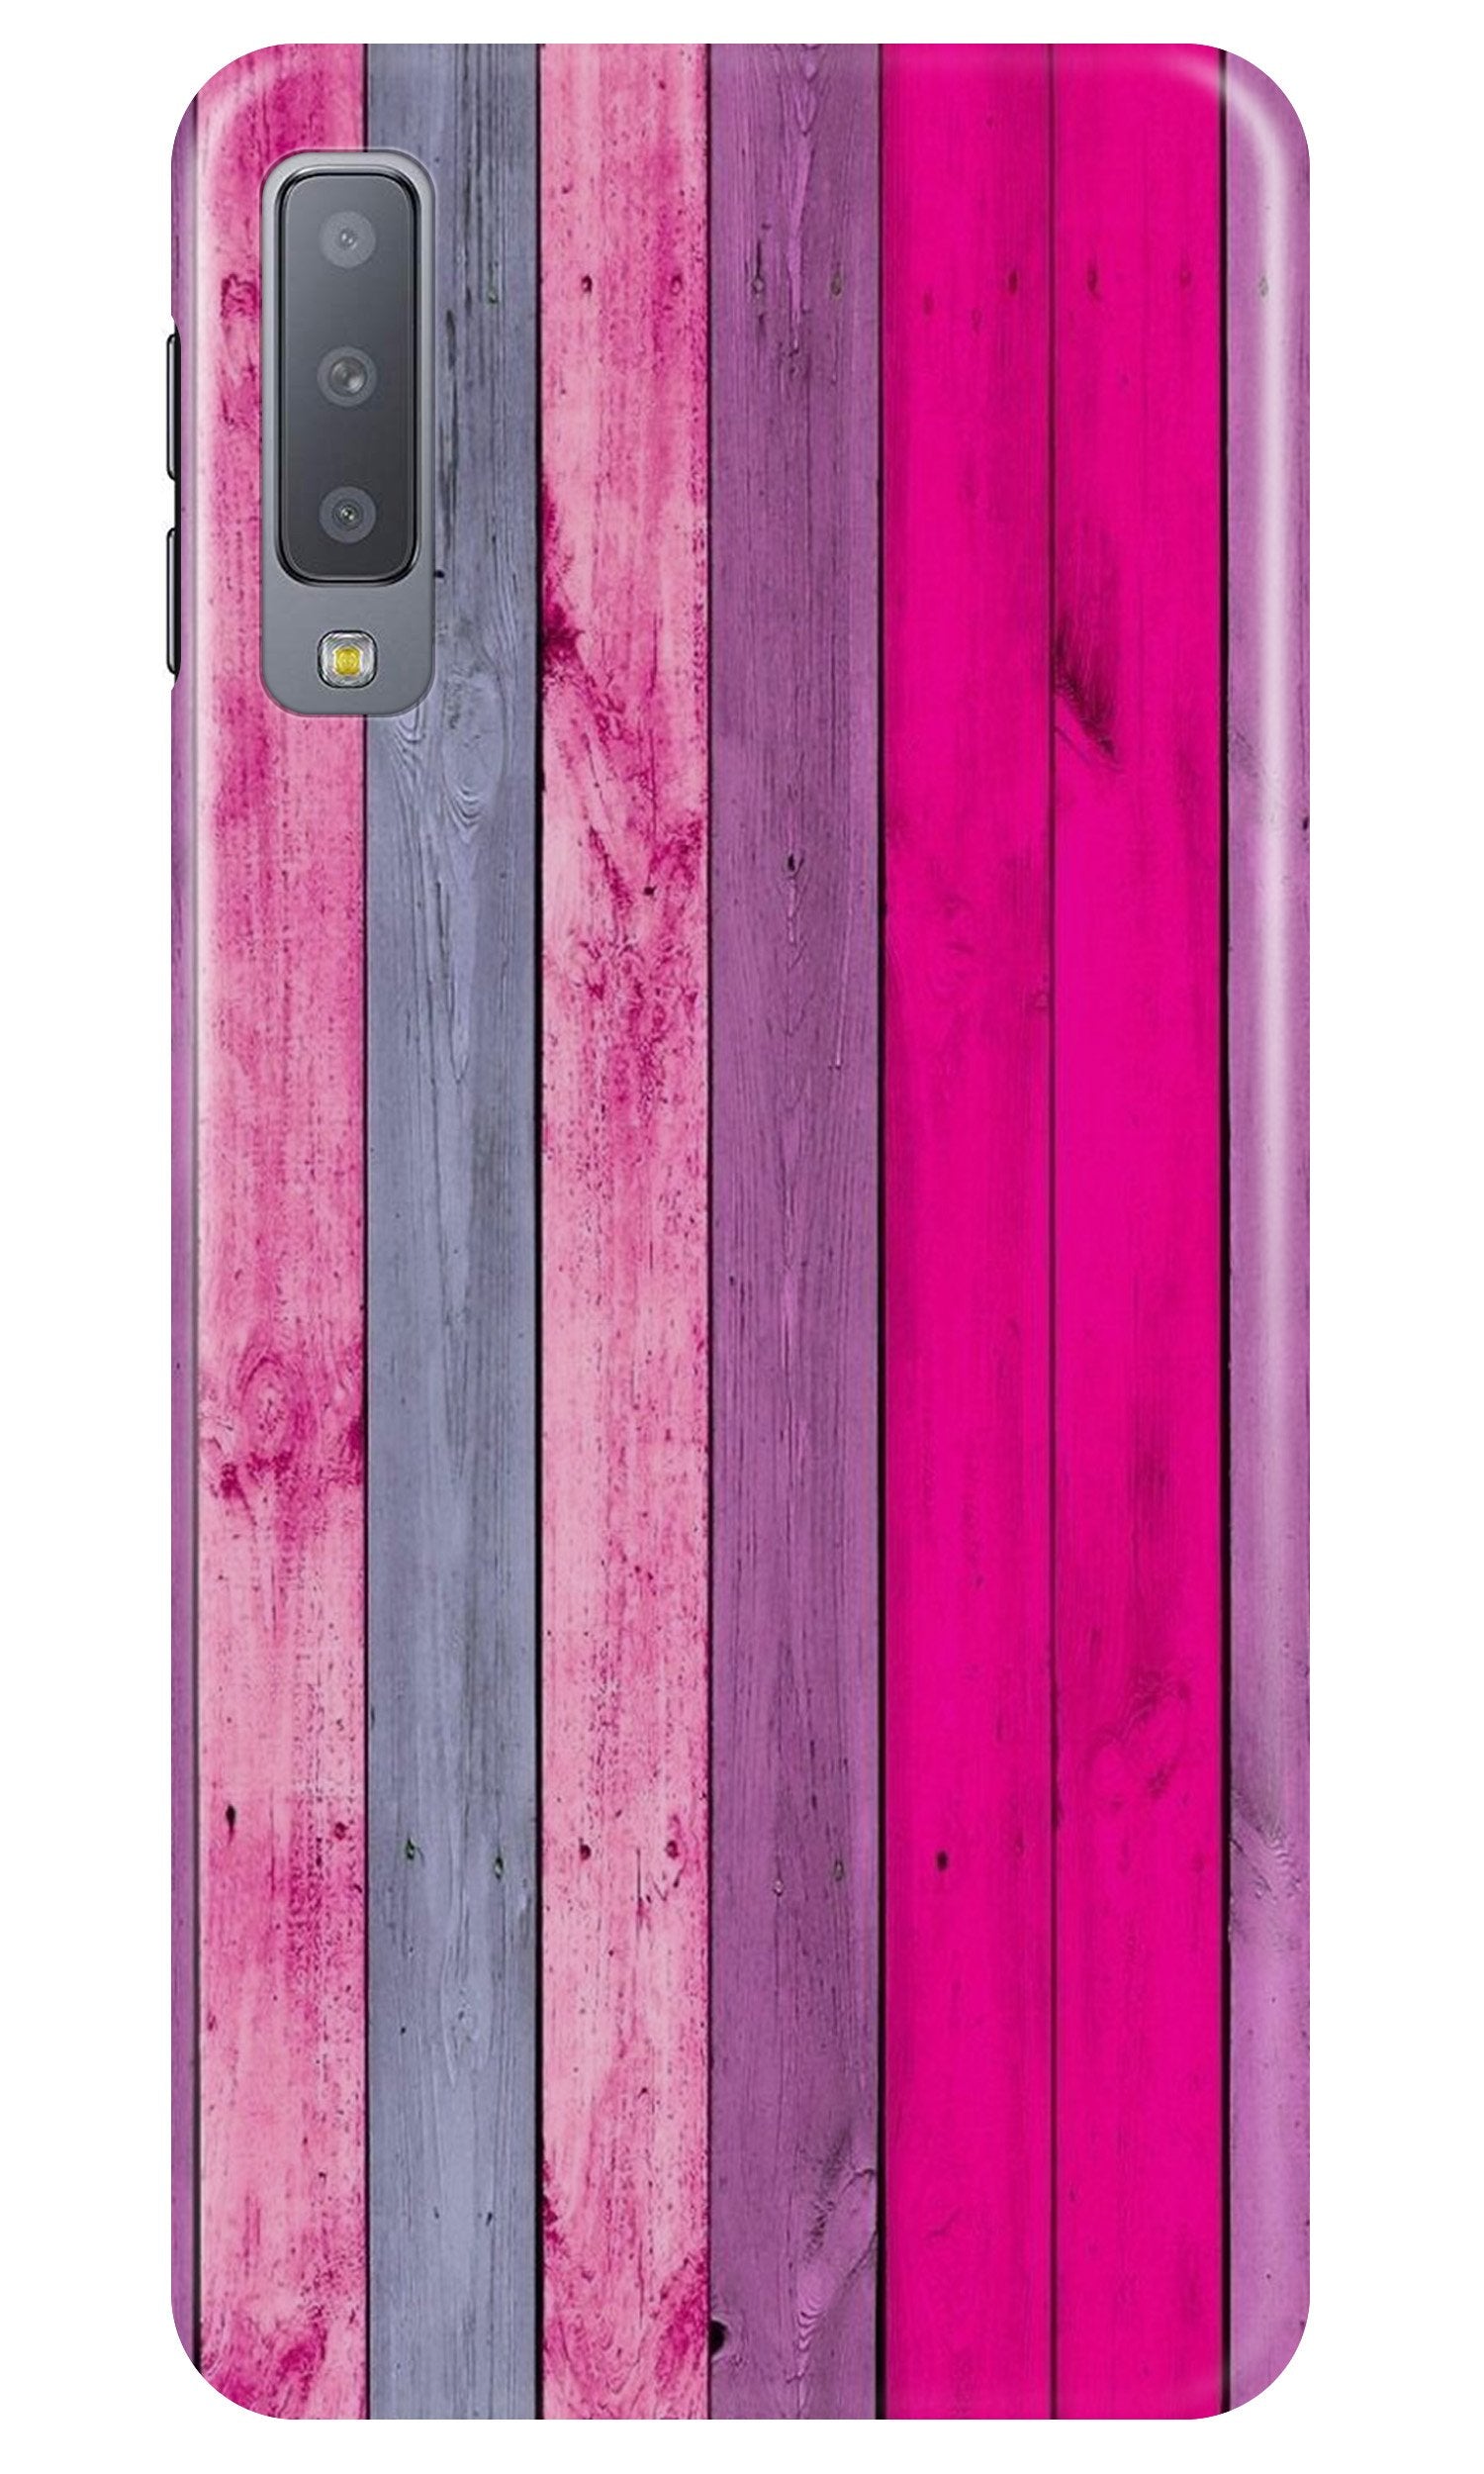 Wooden look Case for Samsung Galaxy A30s